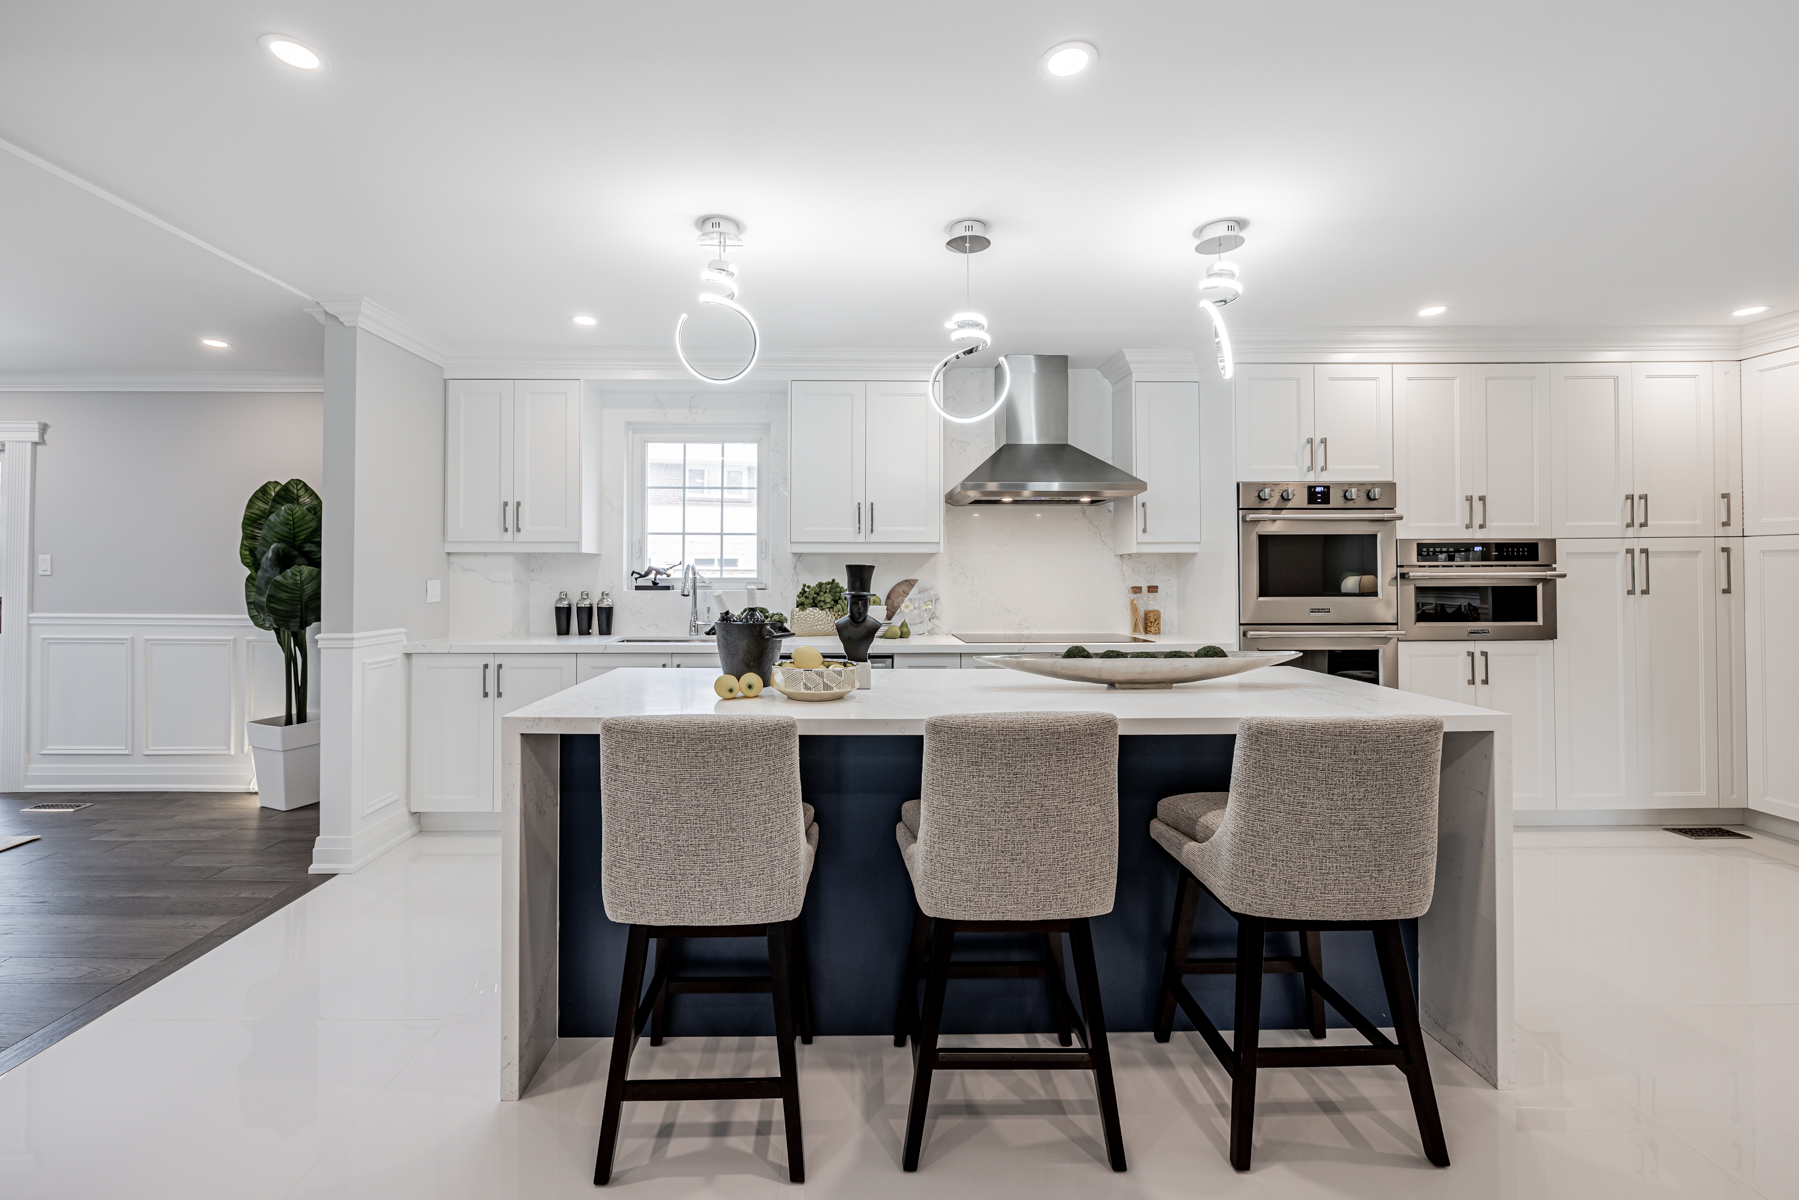 3 Logwood Court kitchen with 3 LED chandeliers and quartz island.